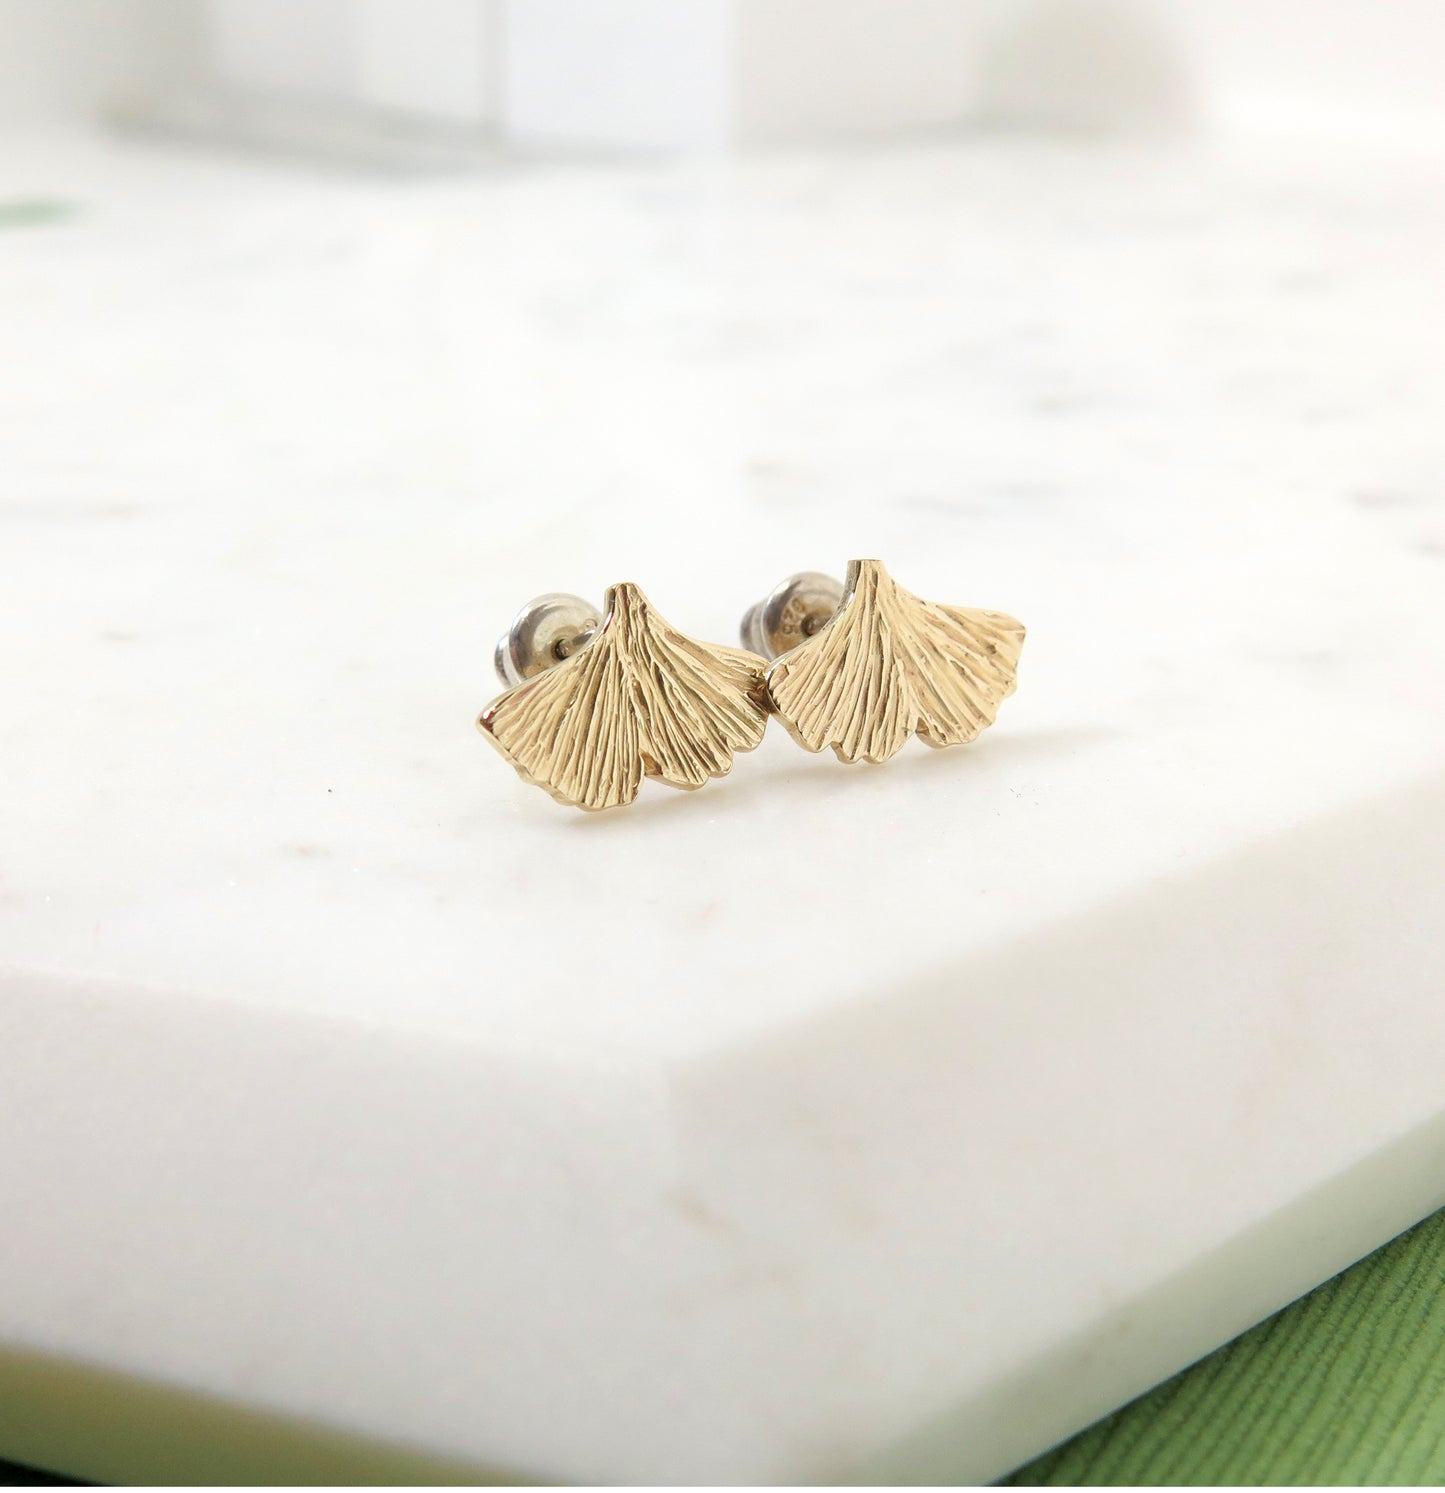 Textured gold ginkgo leaf stud earrings resting on a piece of marble